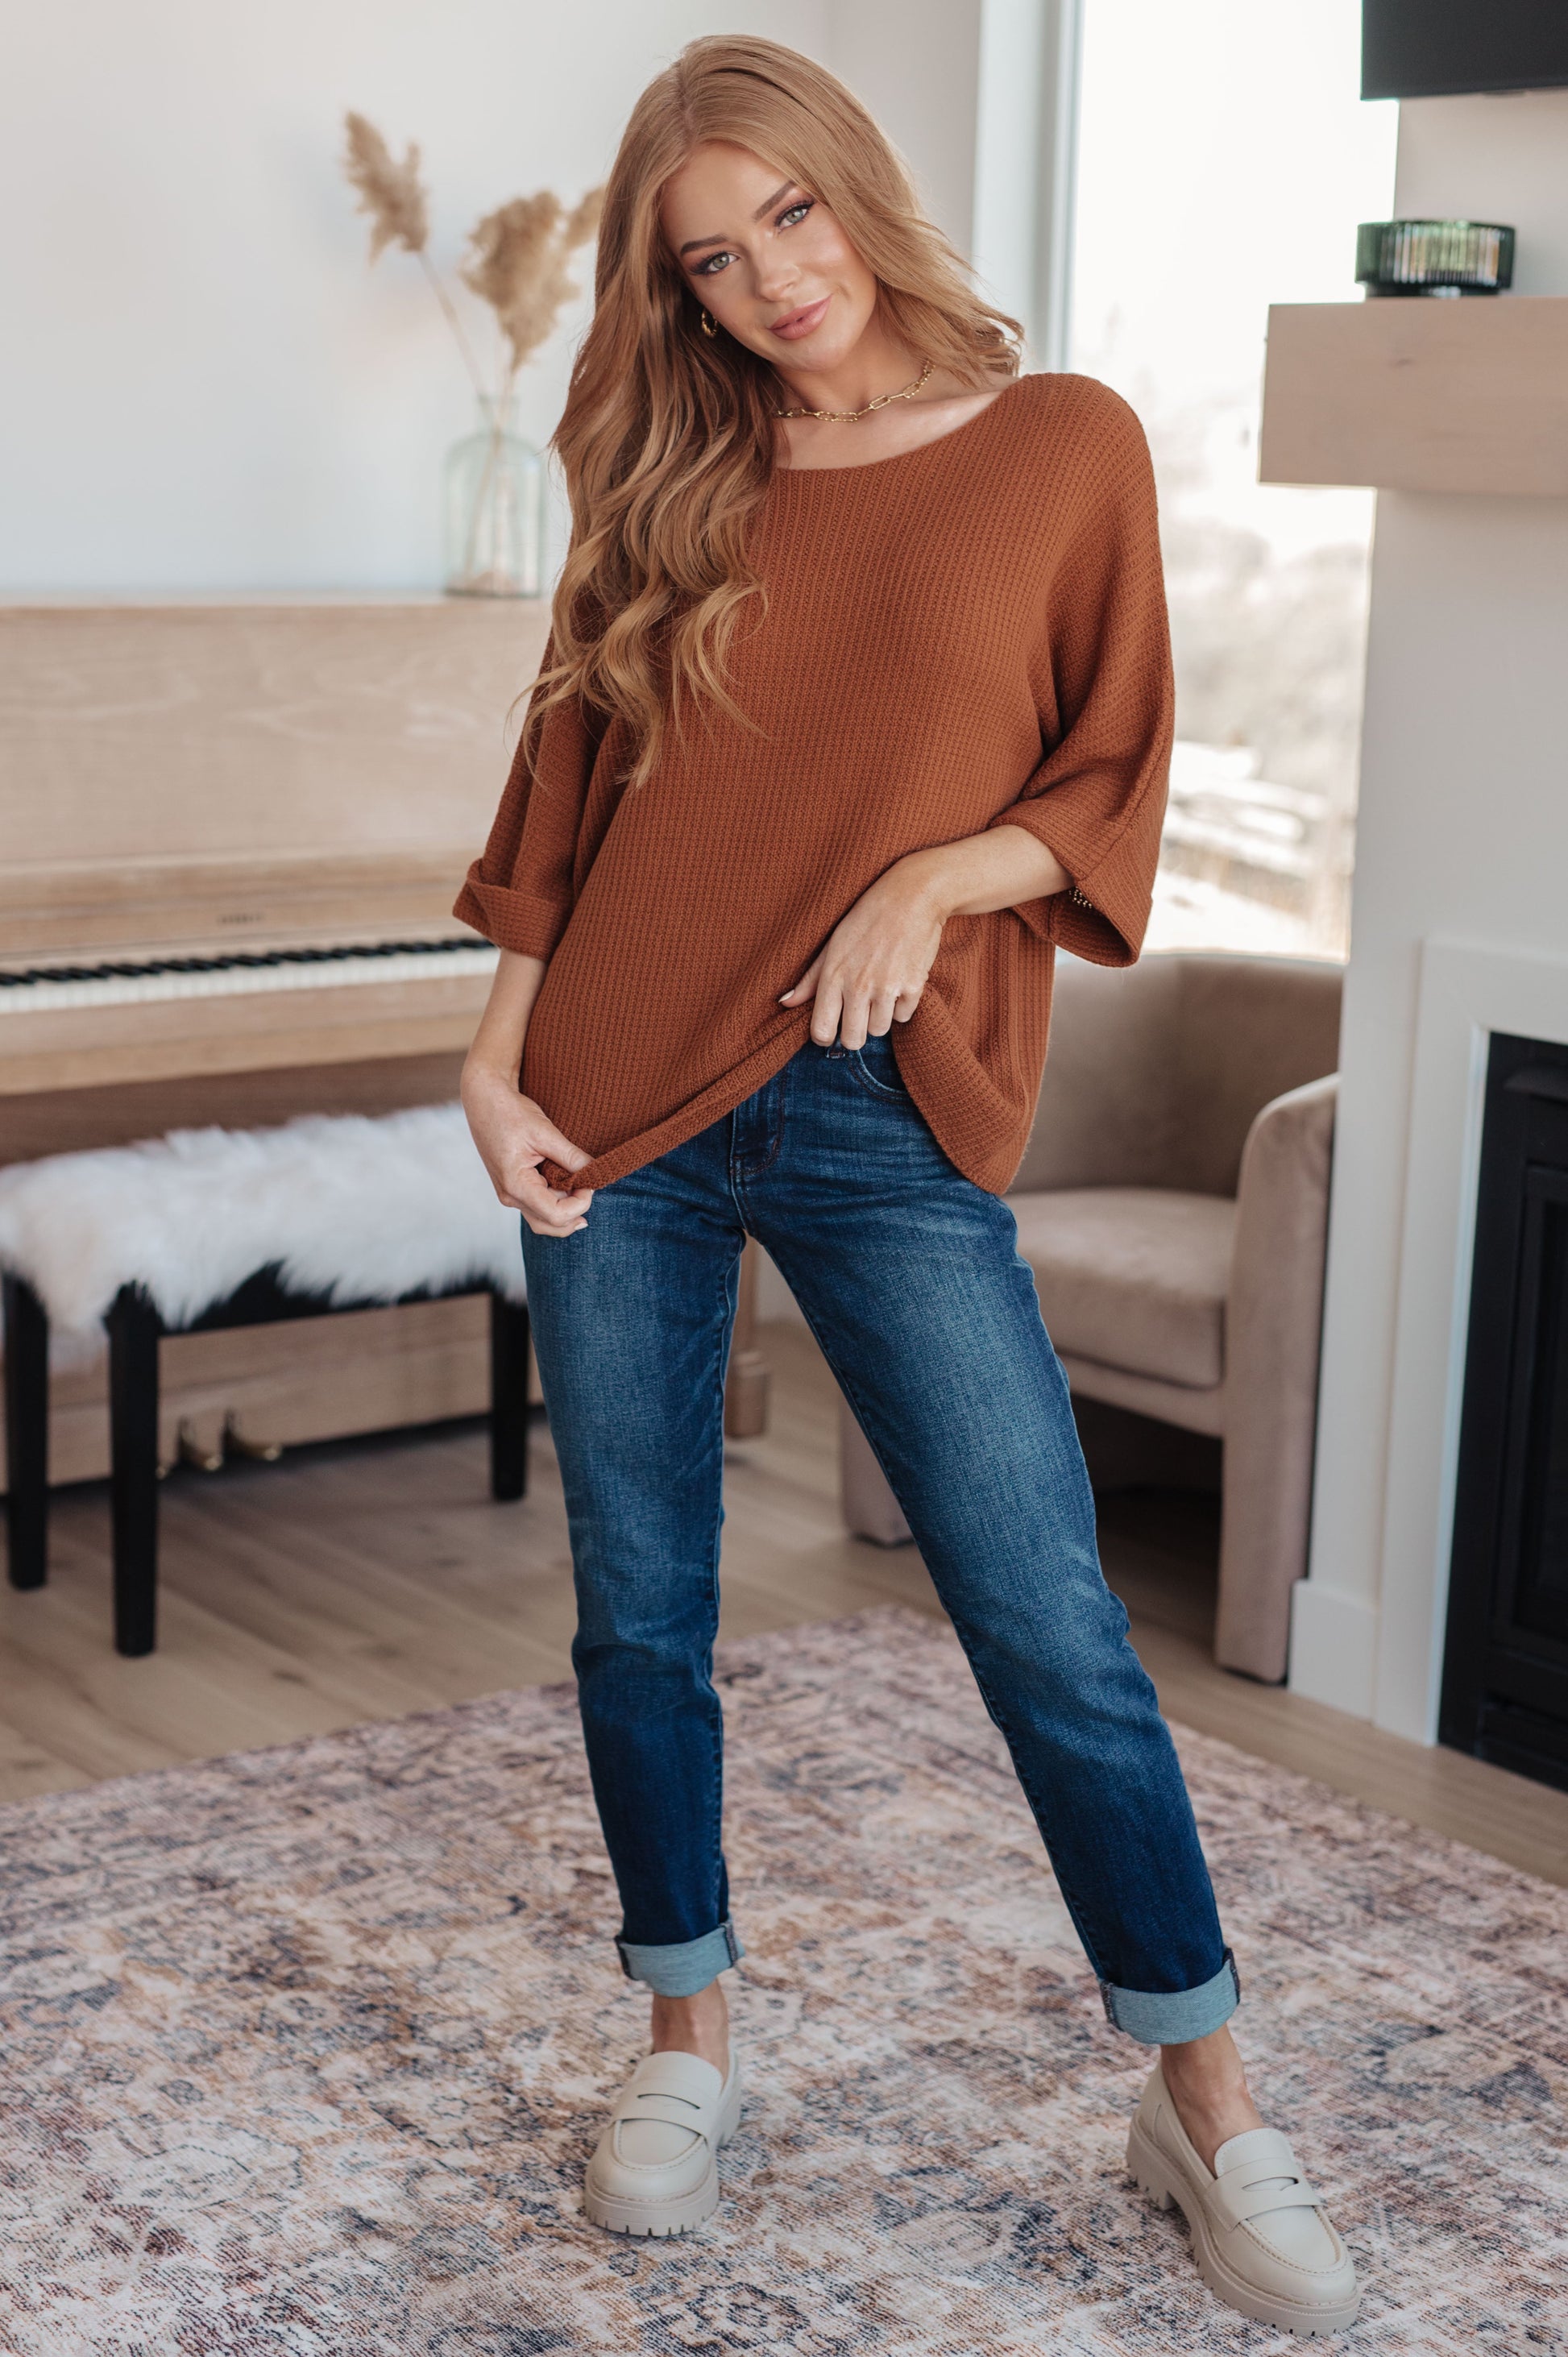 Lotta Love Knitted Sweater Top in Rust - Three Bears Boutique